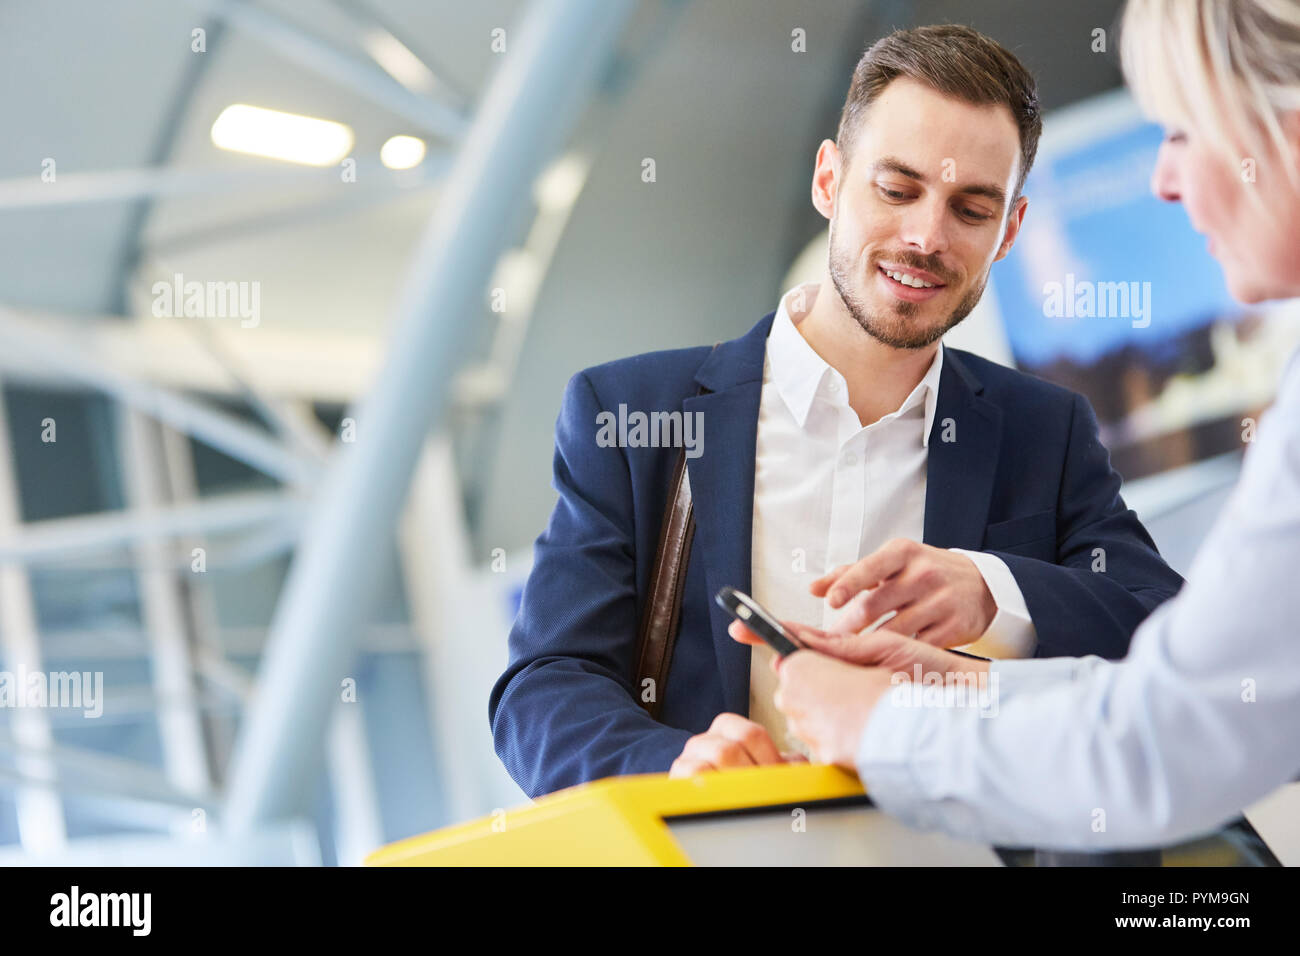 Businessman using smartphone at check in or baggage drop off counter in airport Stock Photo